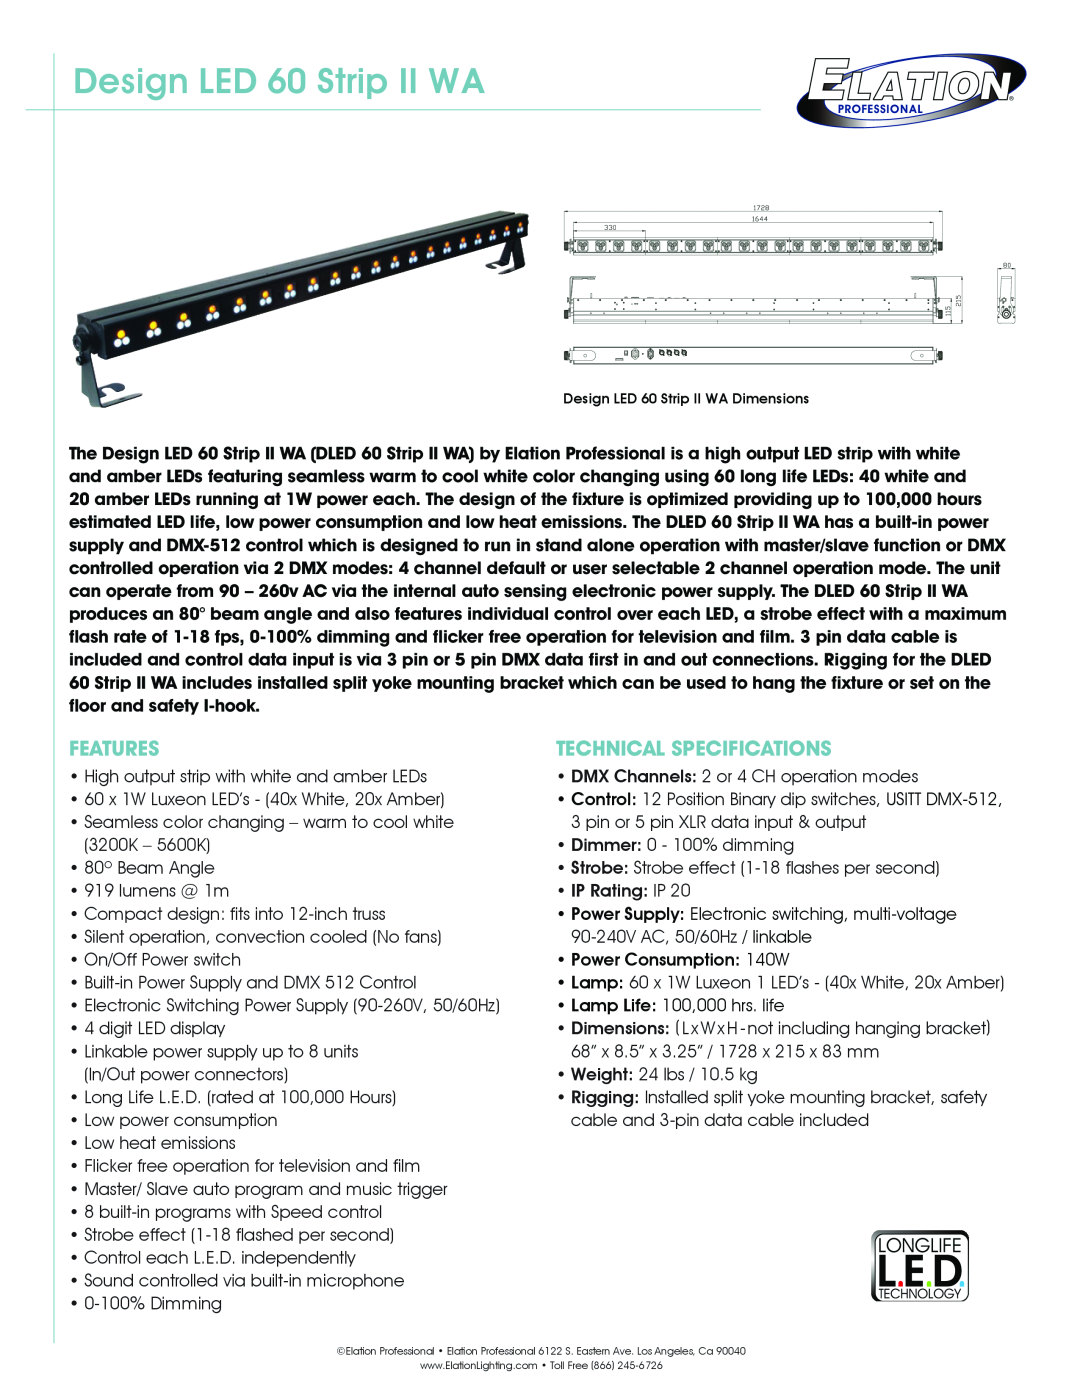 Elation Professional technical specifications Design LED 60 Strip II WA, Features, Technical Specifications 